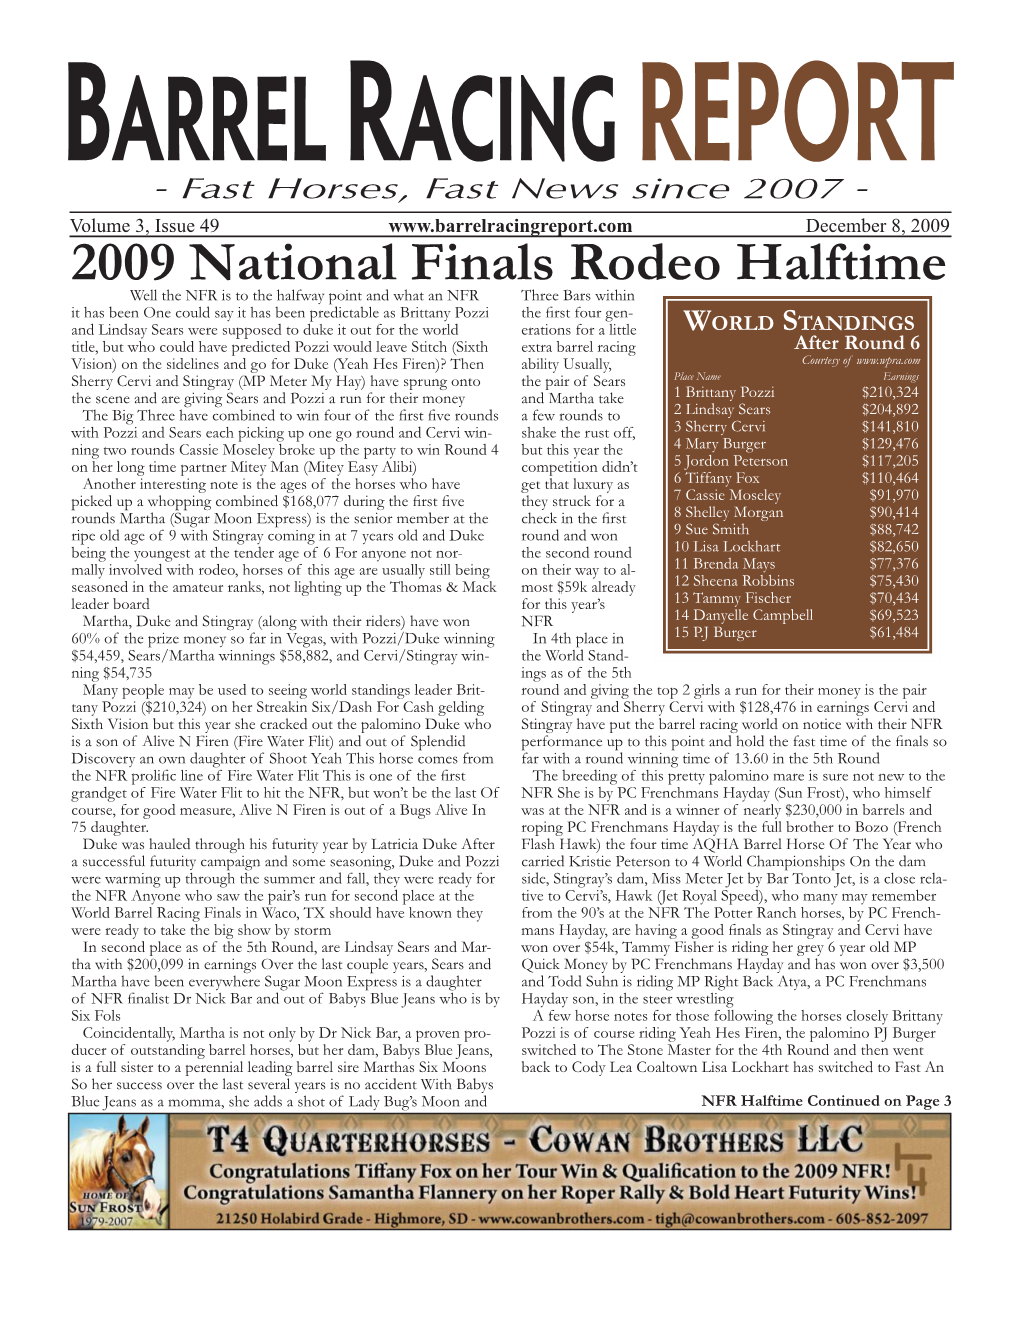 2009 National Finals Rodeo Halftime